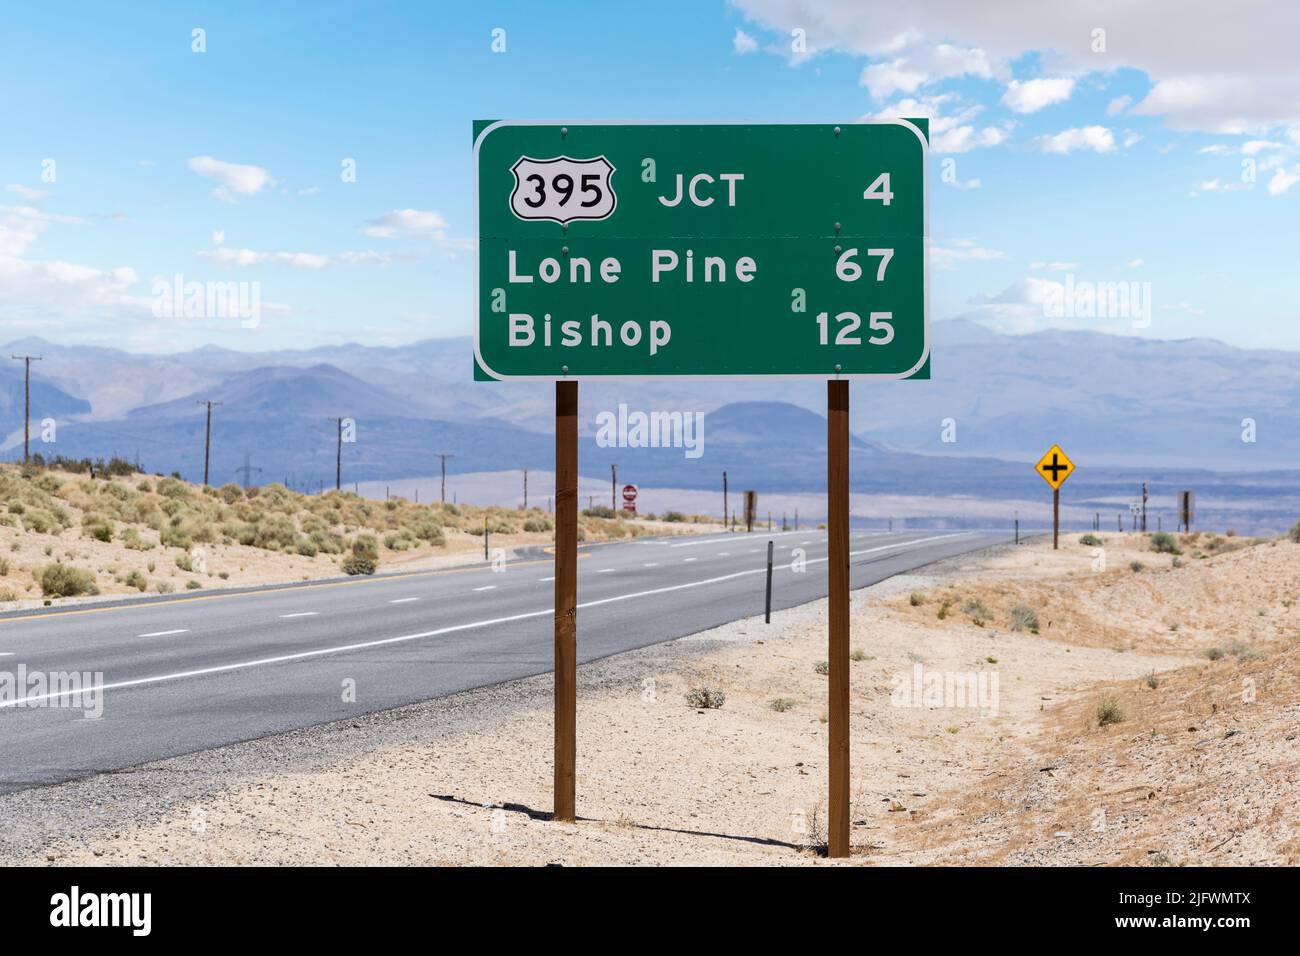 Route 395 to Lone Pine and Bishop highway sign on Route 14 near Mojave in Southern California. Stock Photo